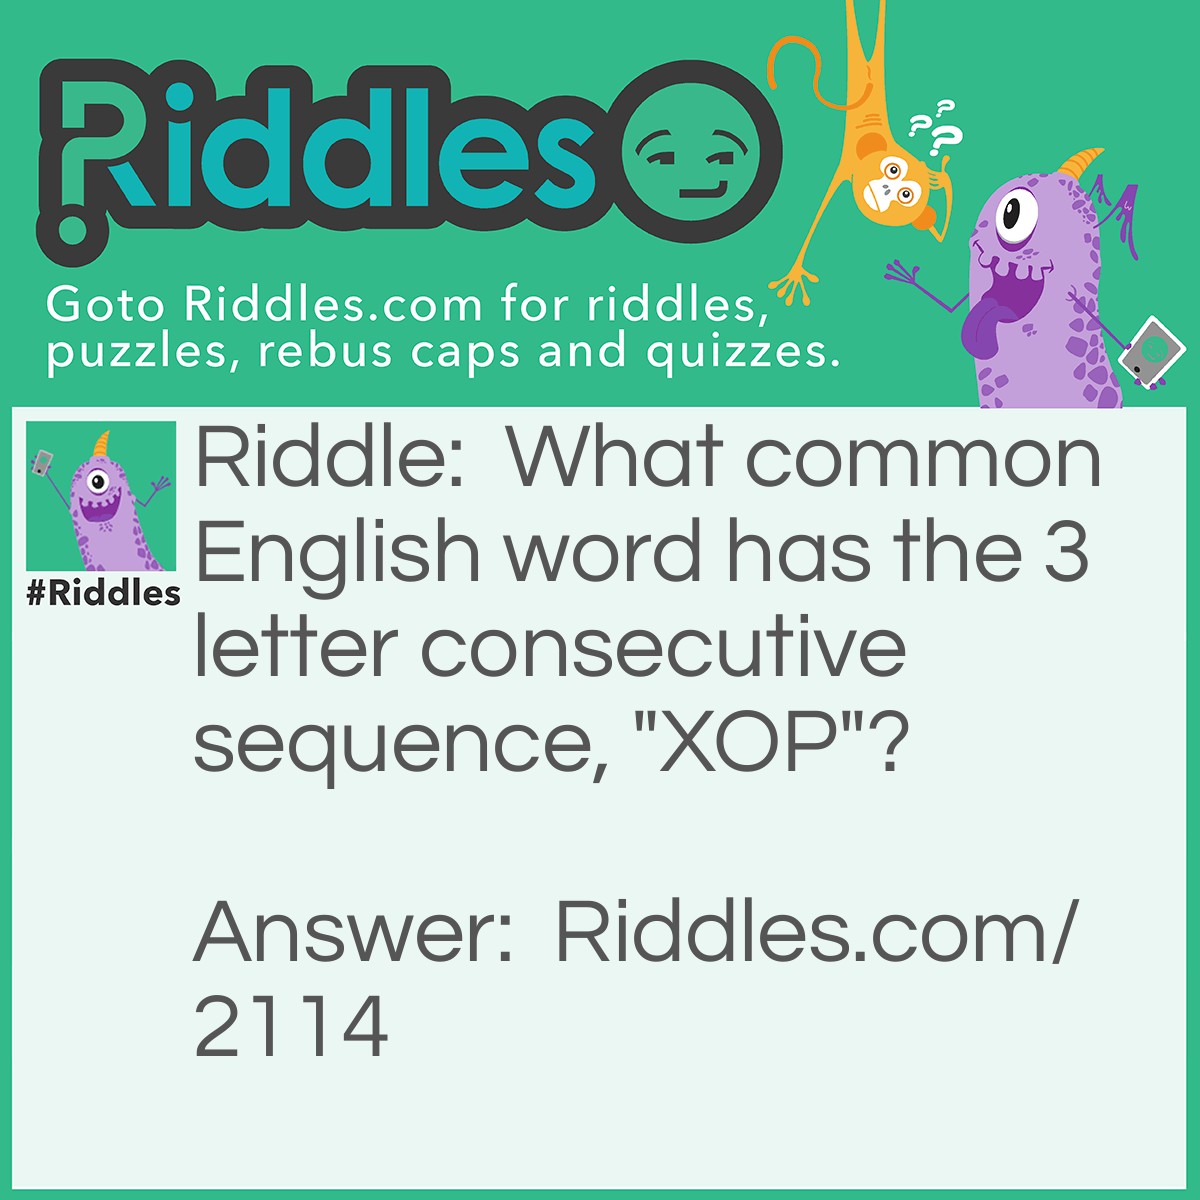 Riddle: What common English word has the 3 letter consecutive sequence, "XOP"? Answer: Sa-xop-hone.